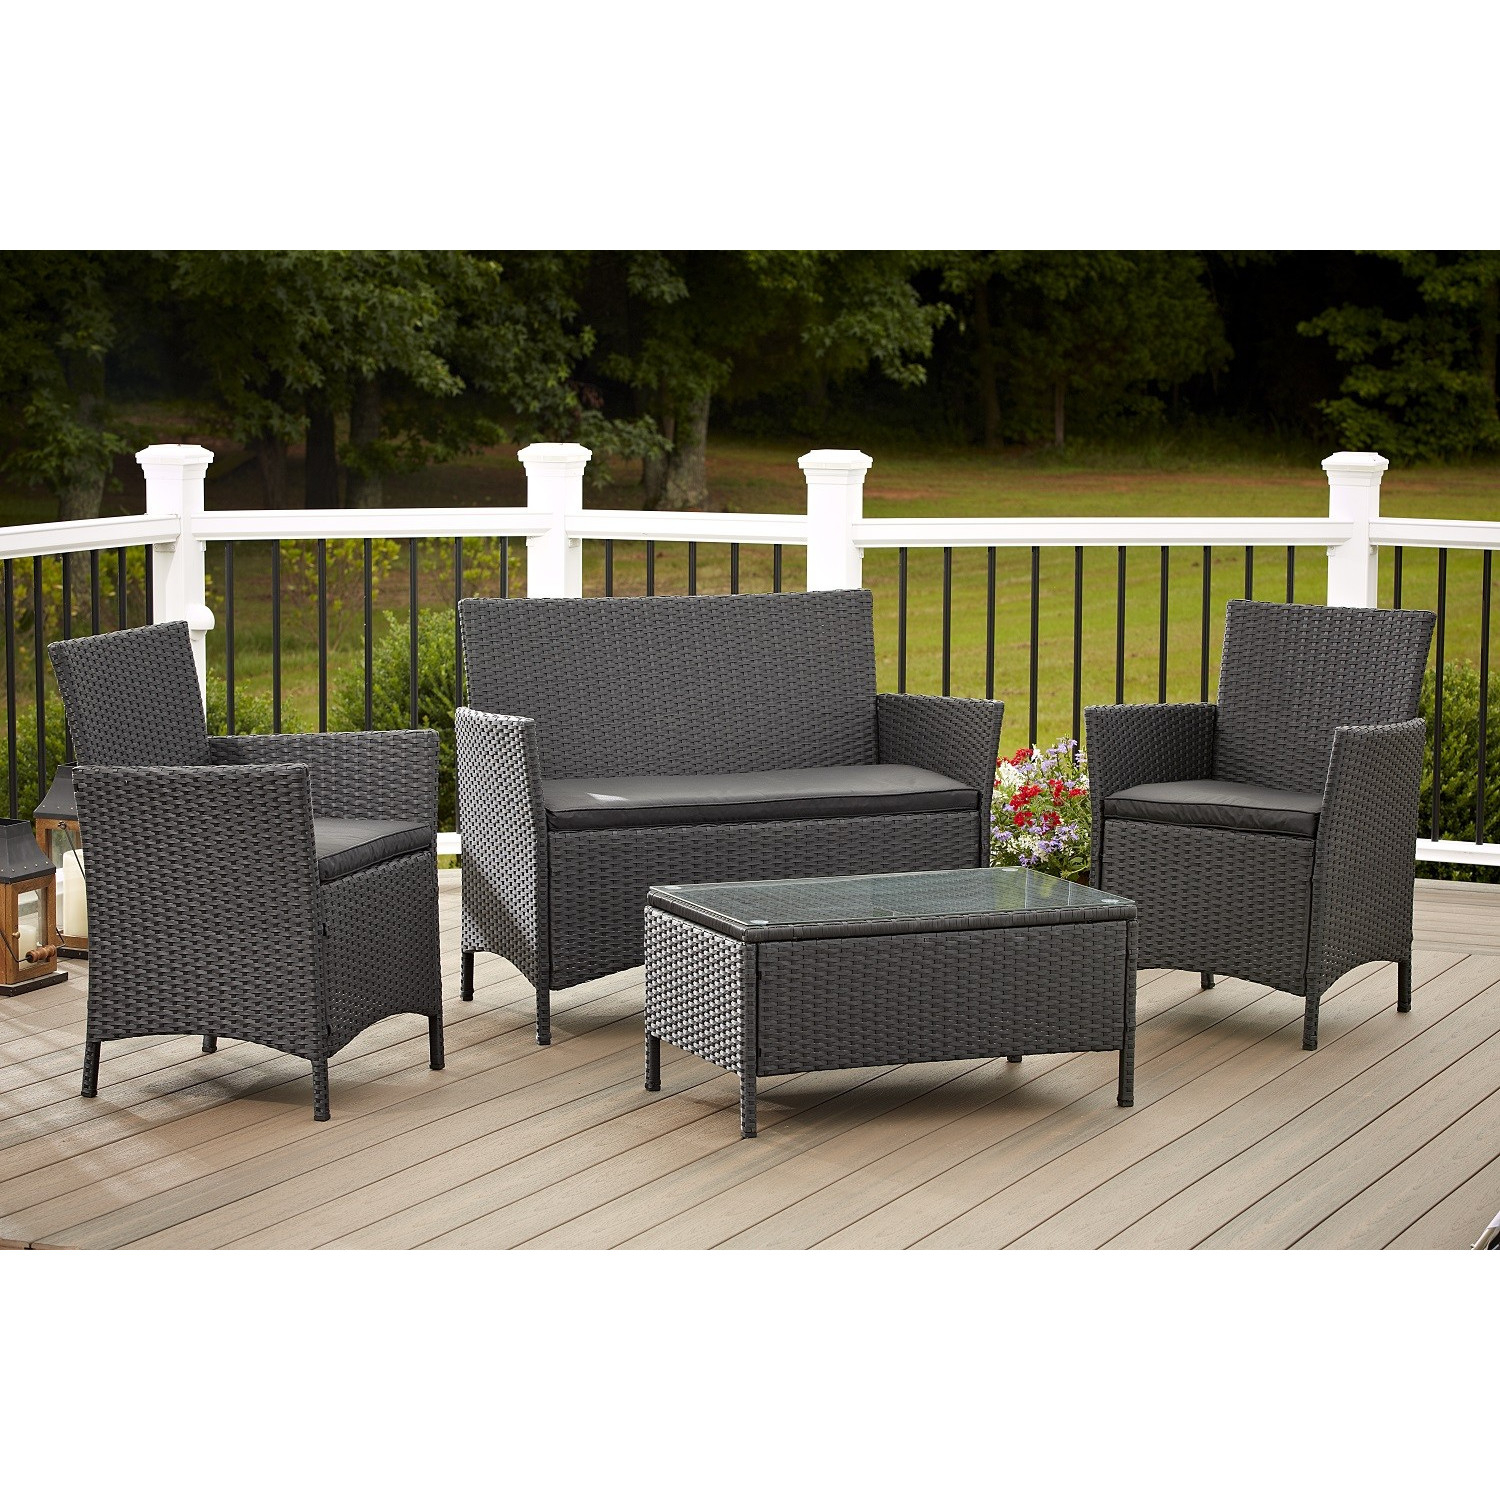 Patio Furniture Kohls with size 1500 X 1500